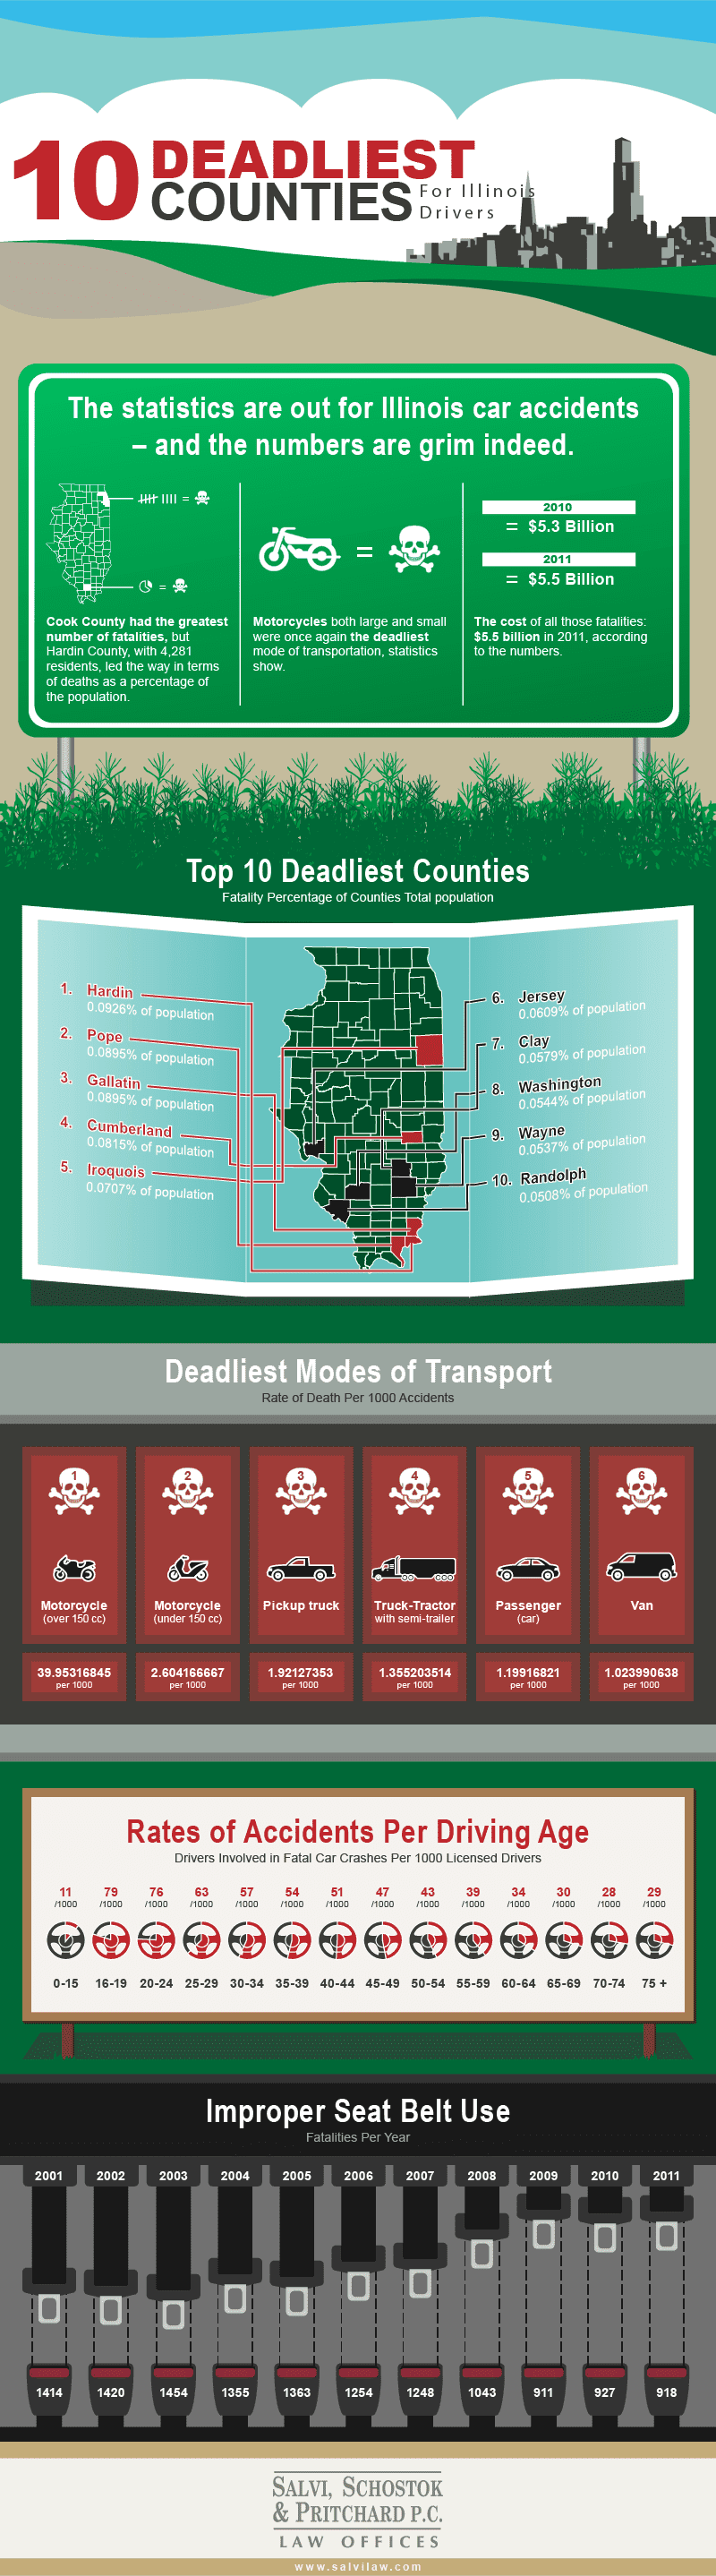 10 Deadliest Counties For Illinois Drivers #infographic #Car Crash Facts #Deadliest Counties #Transportation #infographics